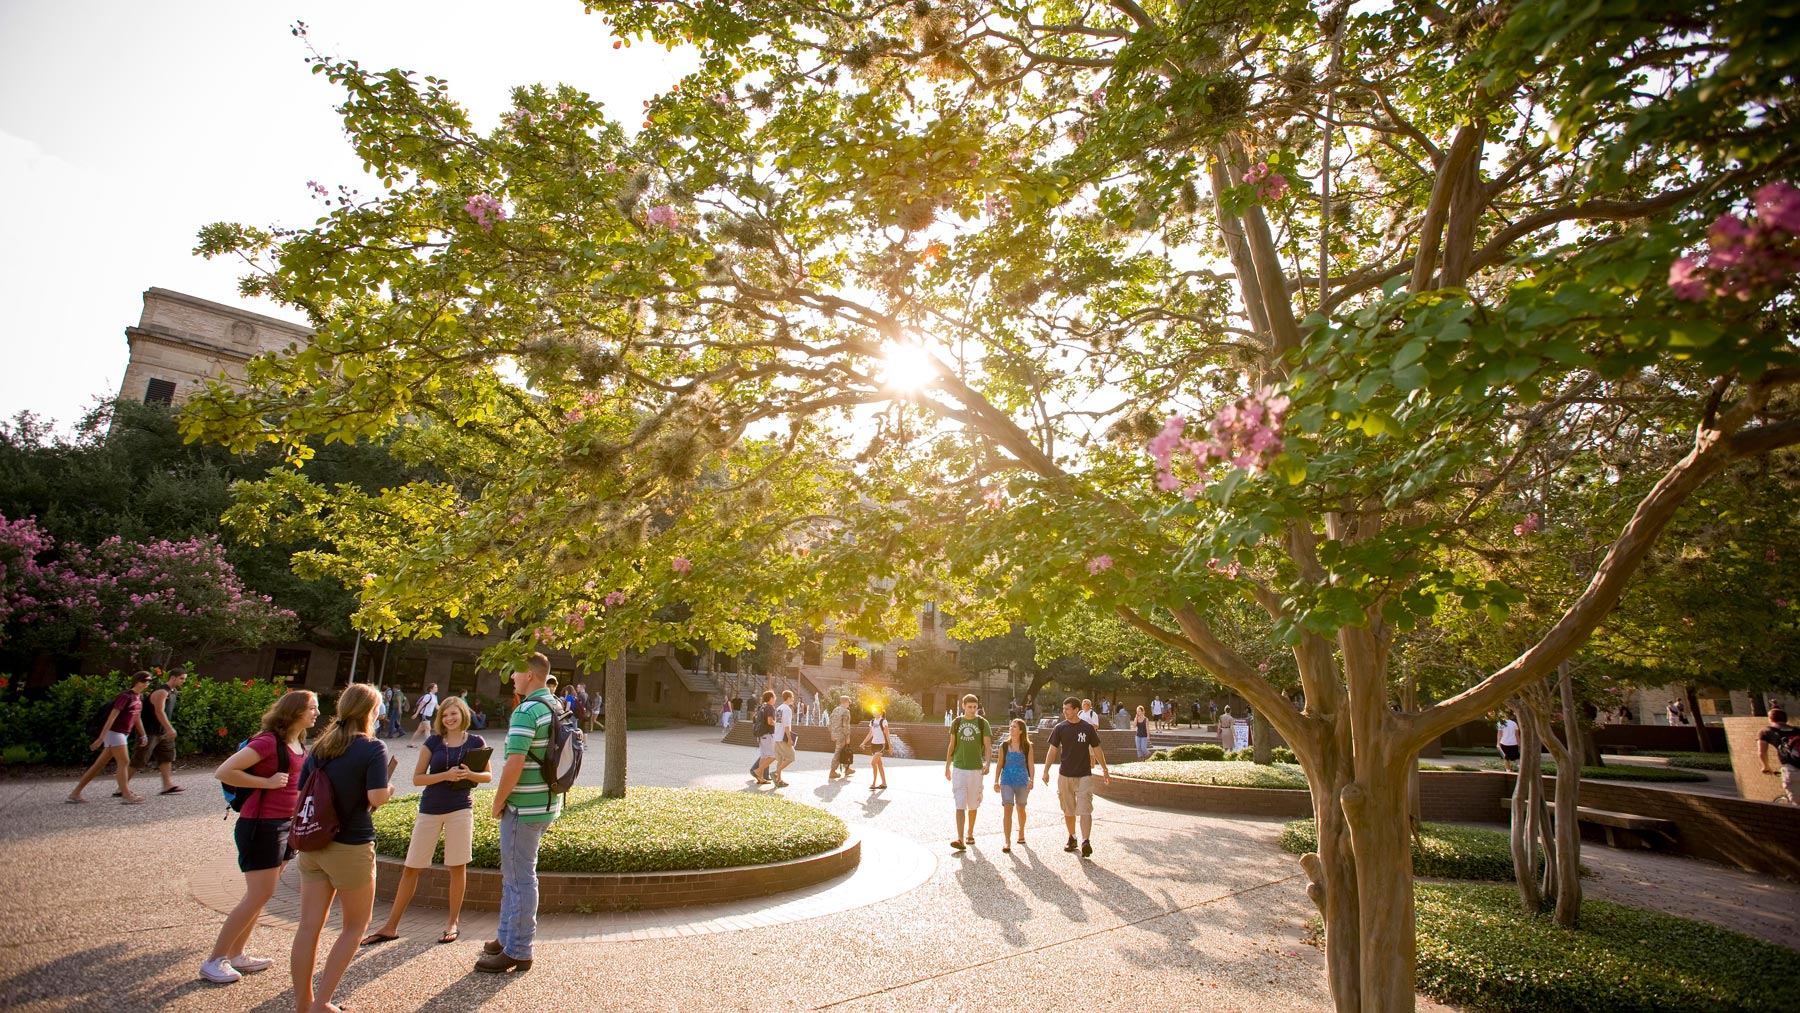 Various groups of students walking through or chatting at the chemistry fountains on campus. Warm sunlight shines through a tree with light pink flowers.